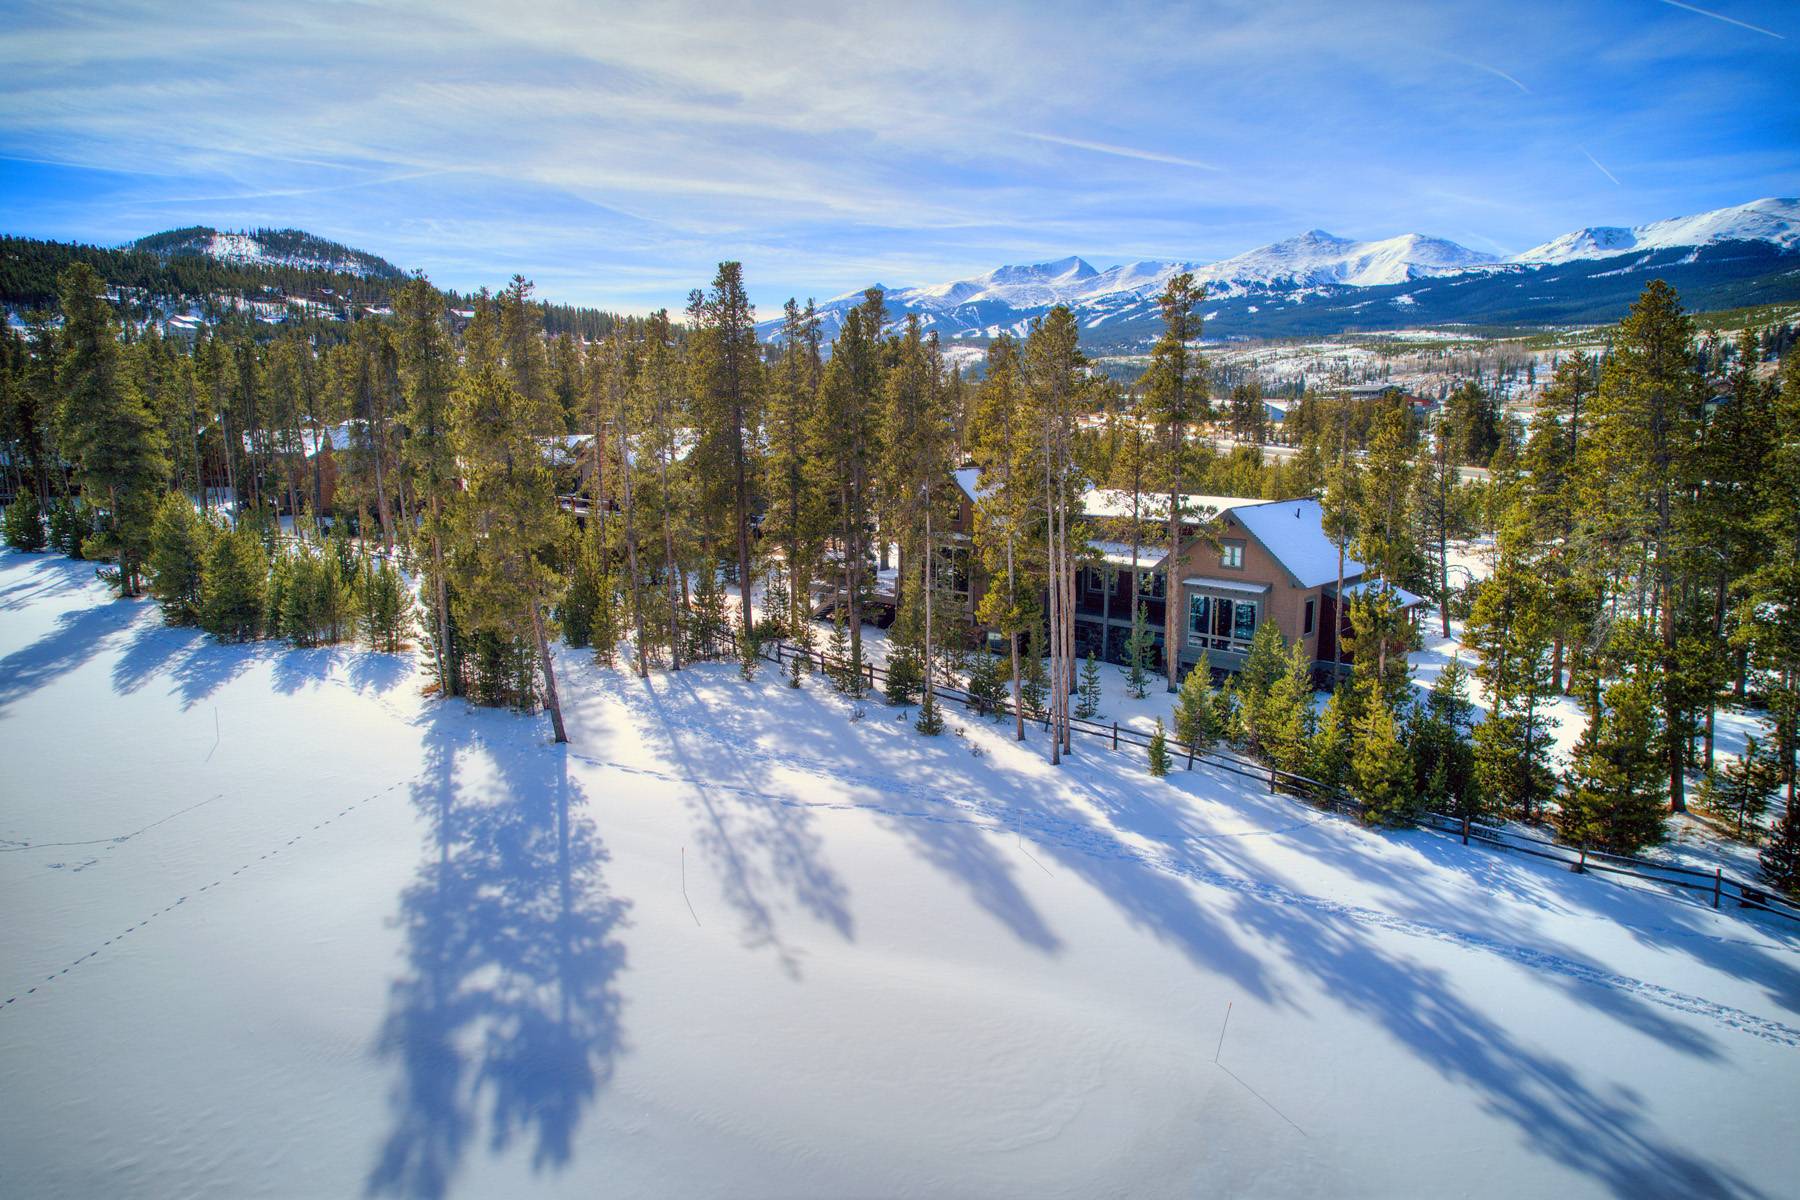 Breckenridge Golf Course with Easy Access to Main Street Breck and Year Around Mountain Fun!